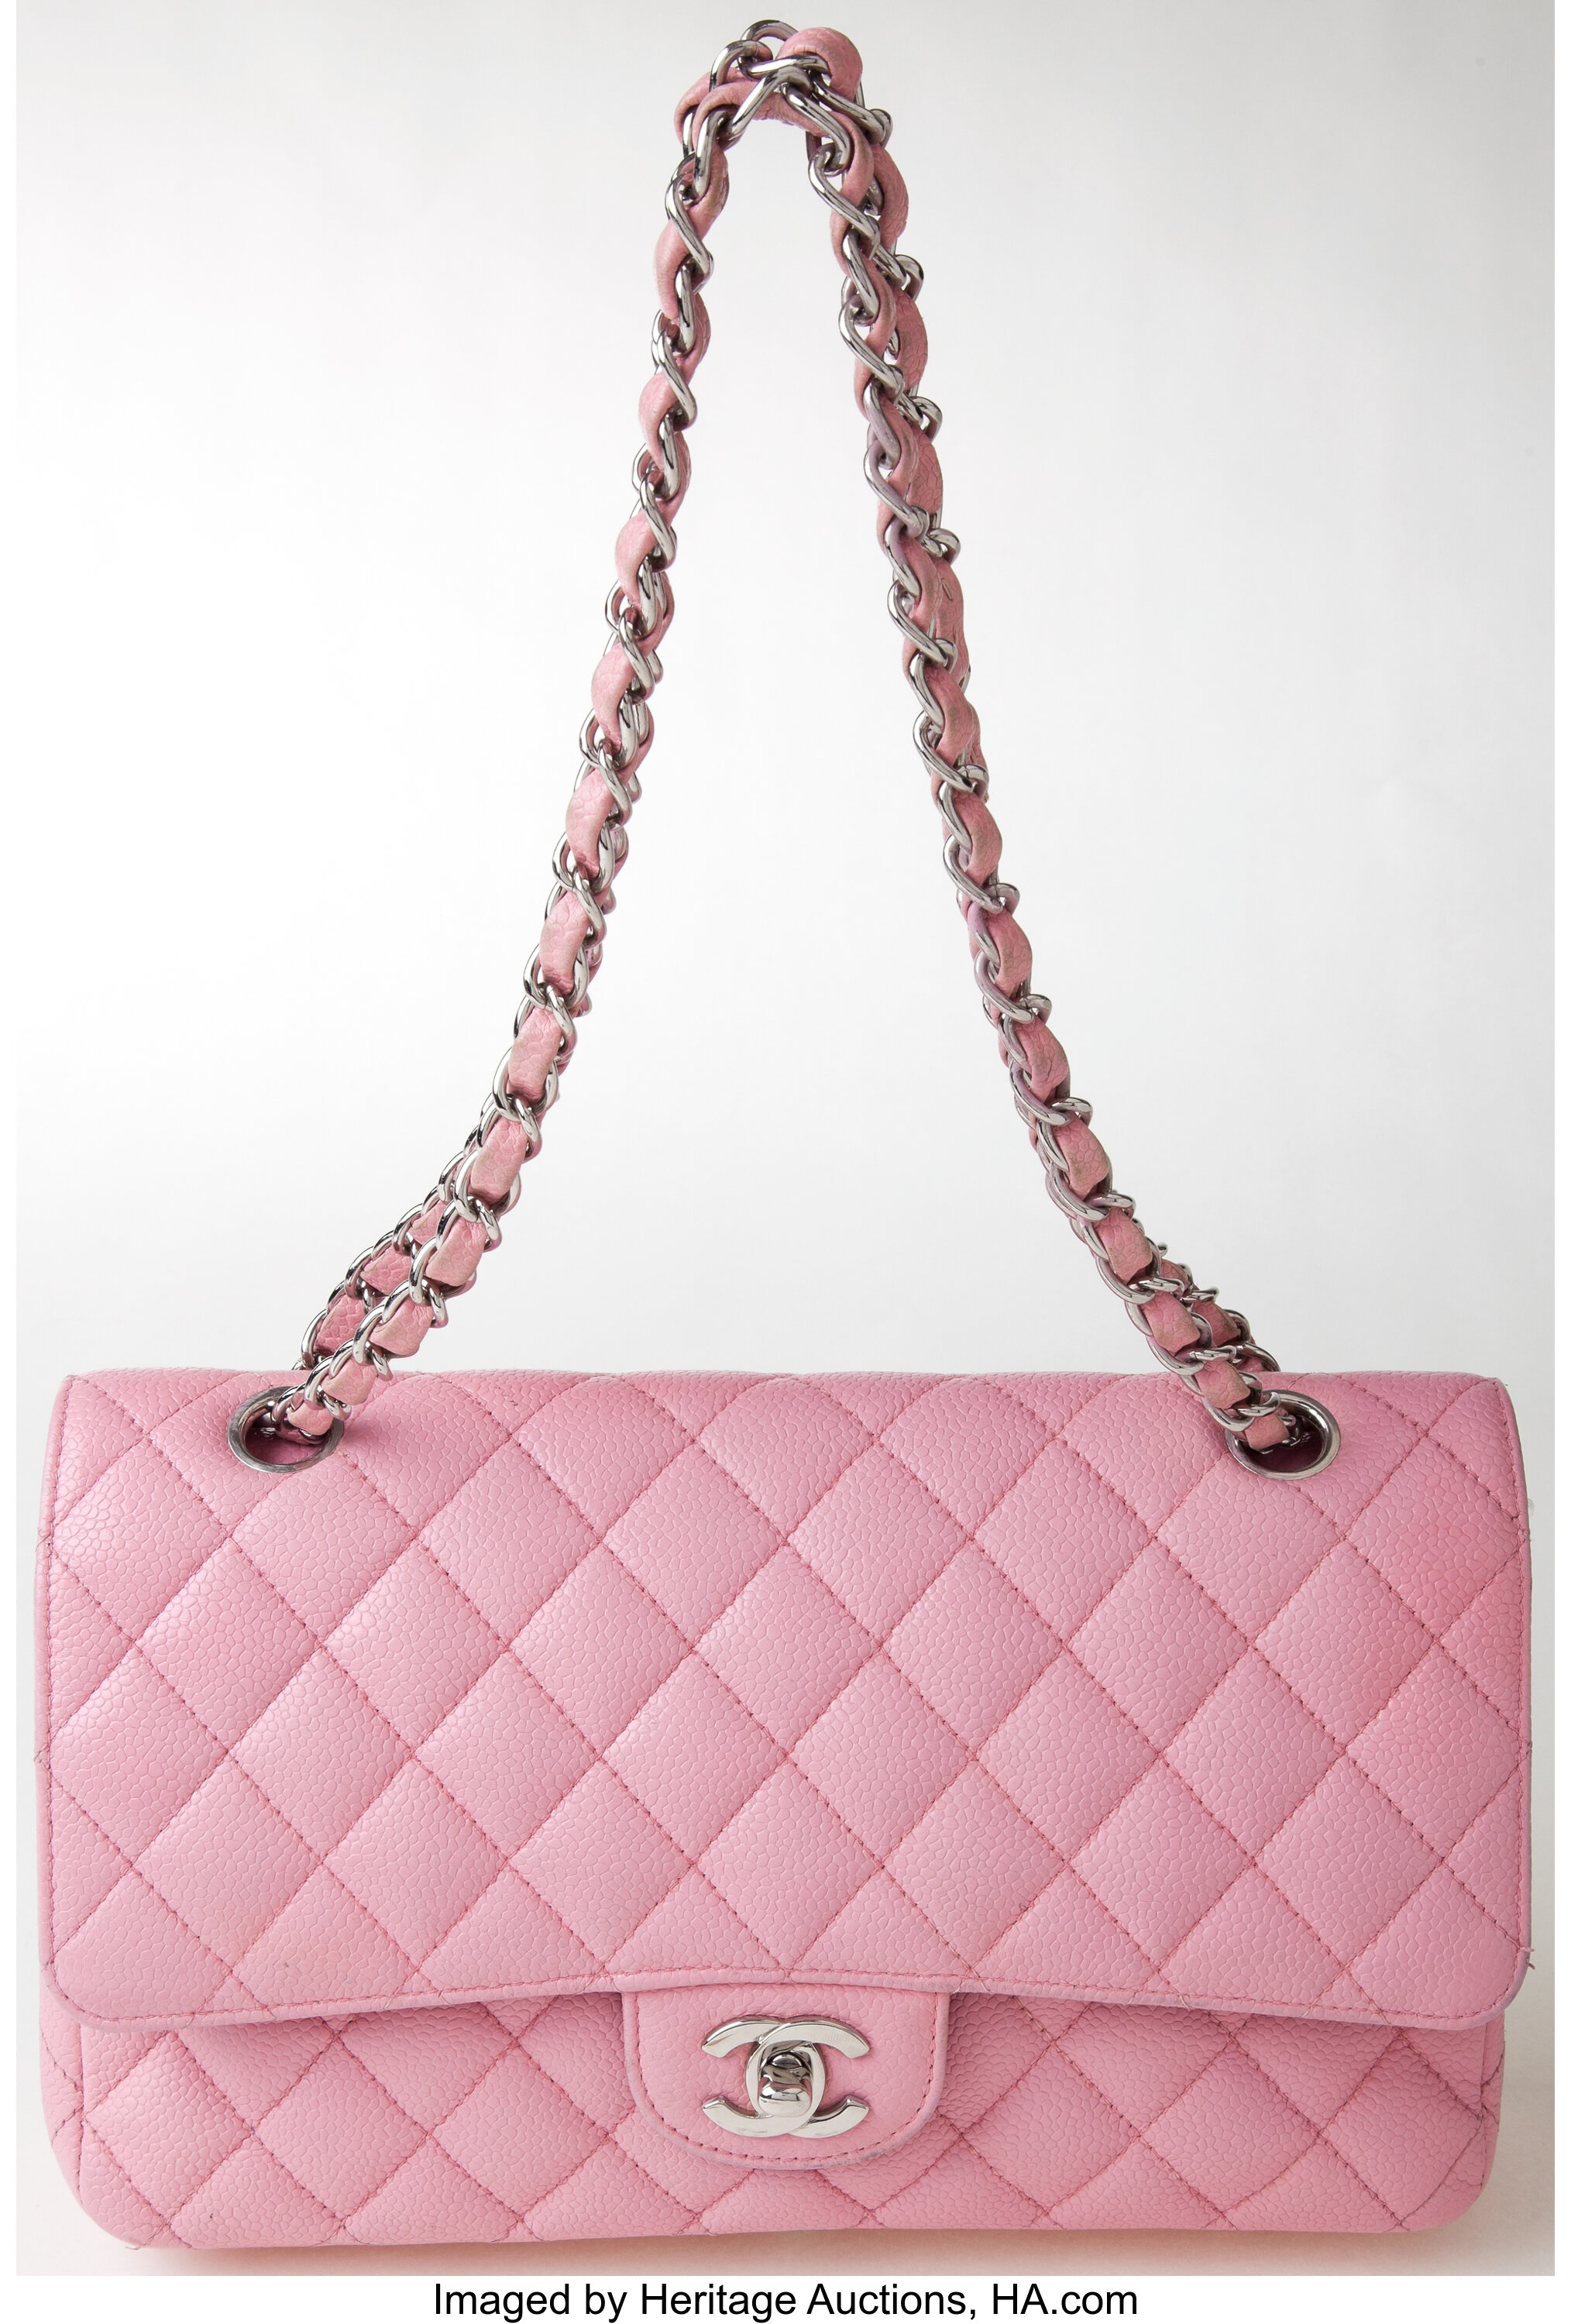 Chanel Pink Floral Boucle Medium 2.55 Double Flap Bag.  Luxury